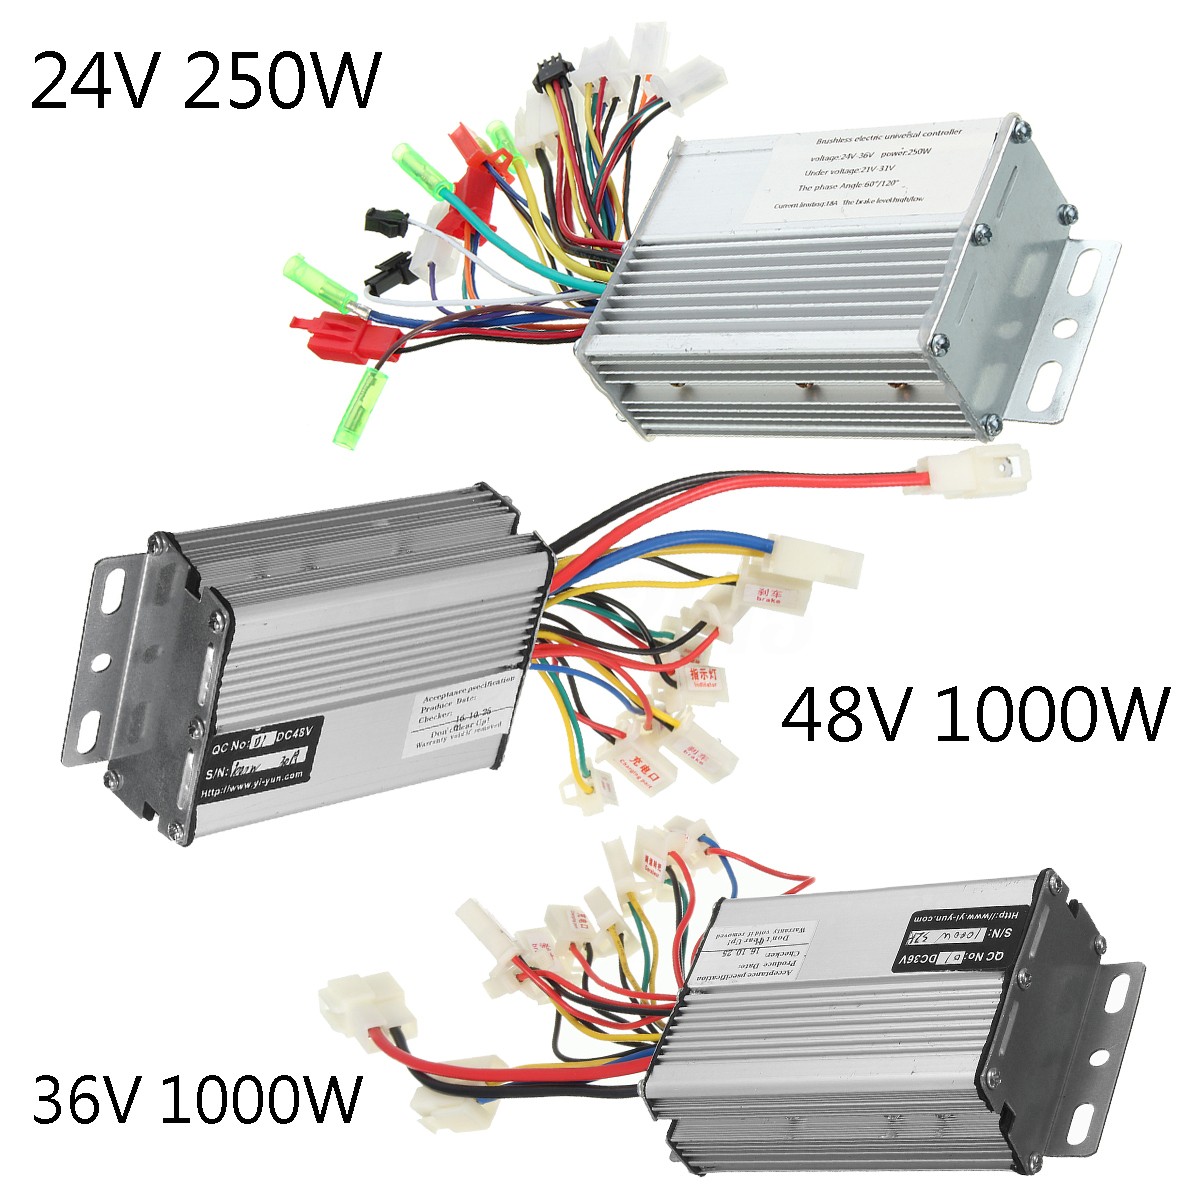 24V 36V 48V 250W 1000W Electric Scooter Speed Controller Motor For Bike Bicycle